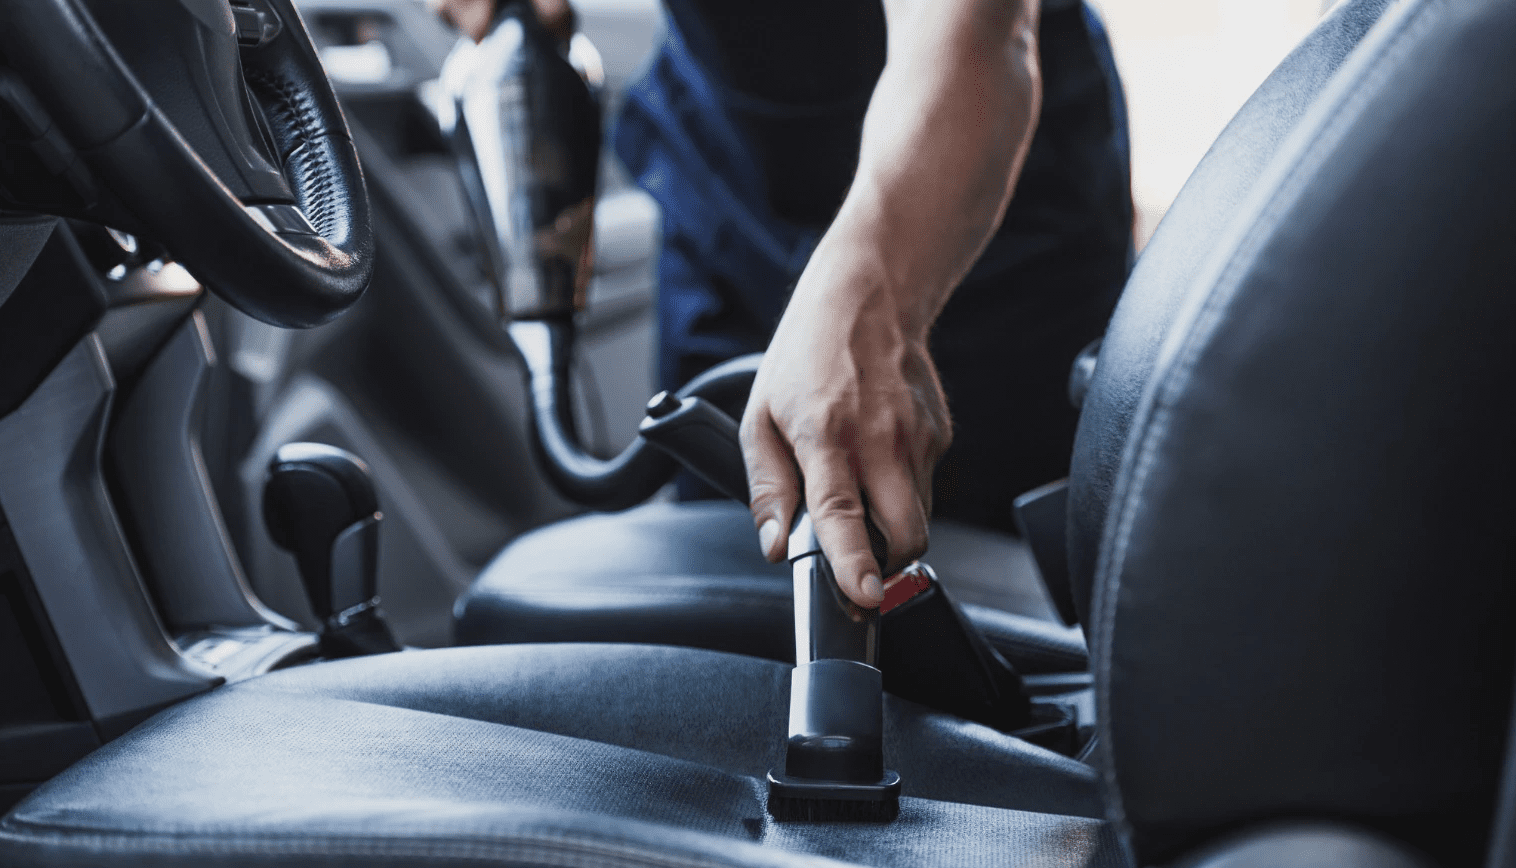 How to clean a car seat cover: Get professional level cleaning with these tricks